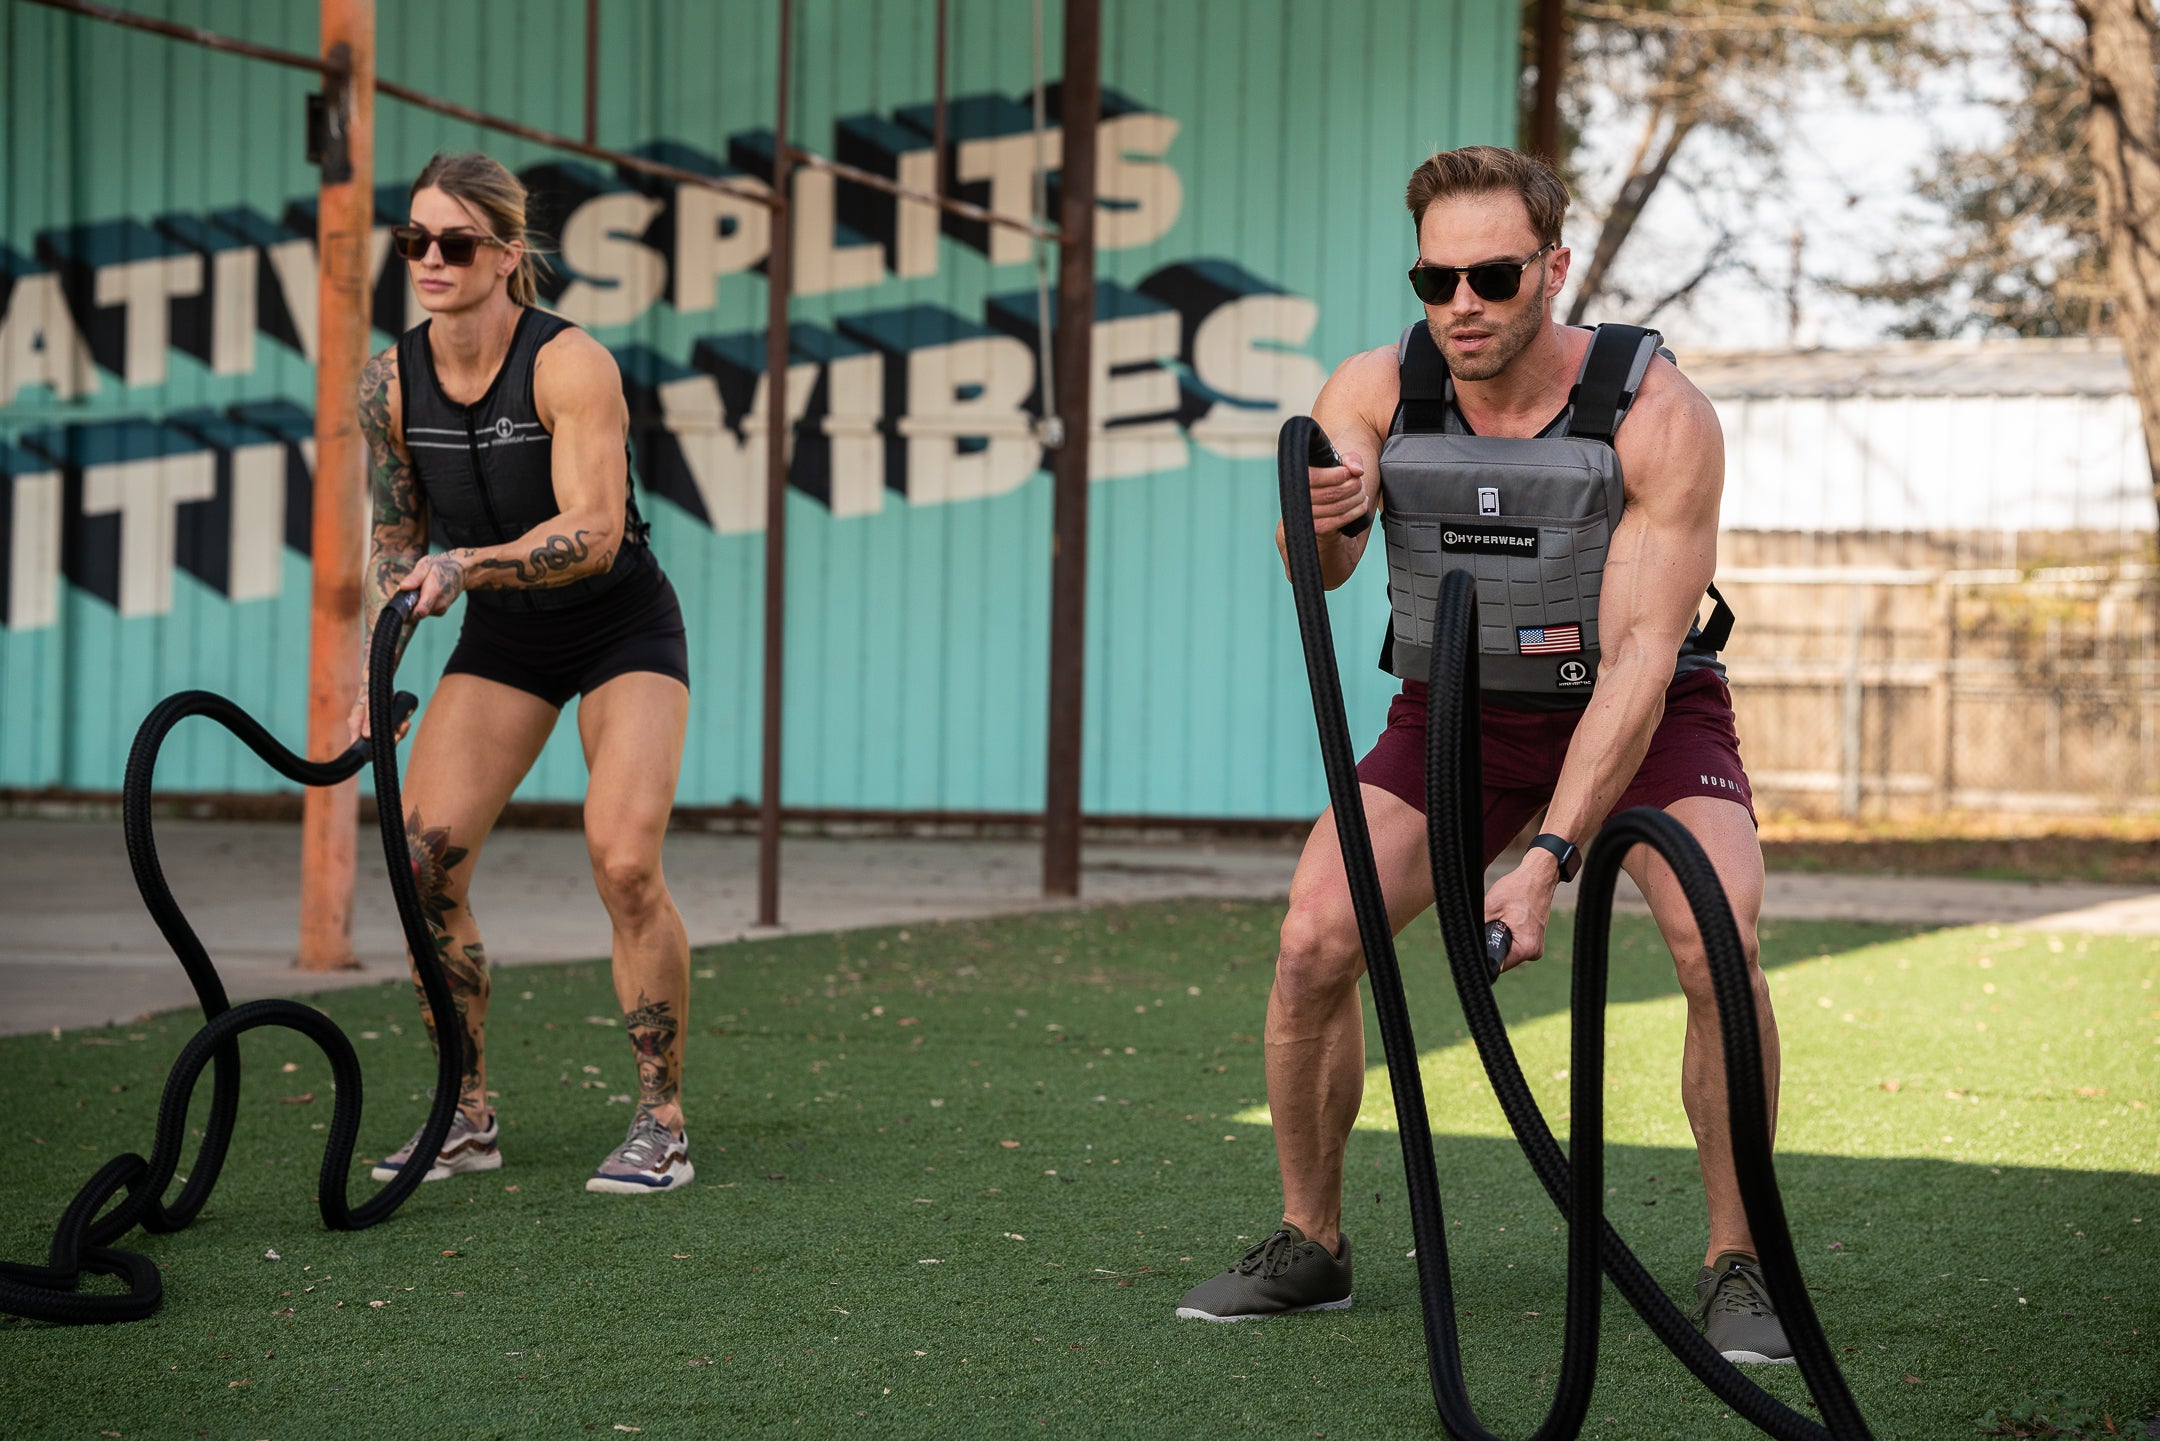 Male and female fitness models are pictured using hyperwear weighted battle ropes and wearing hyper vest weight vests in an outdoor workout session